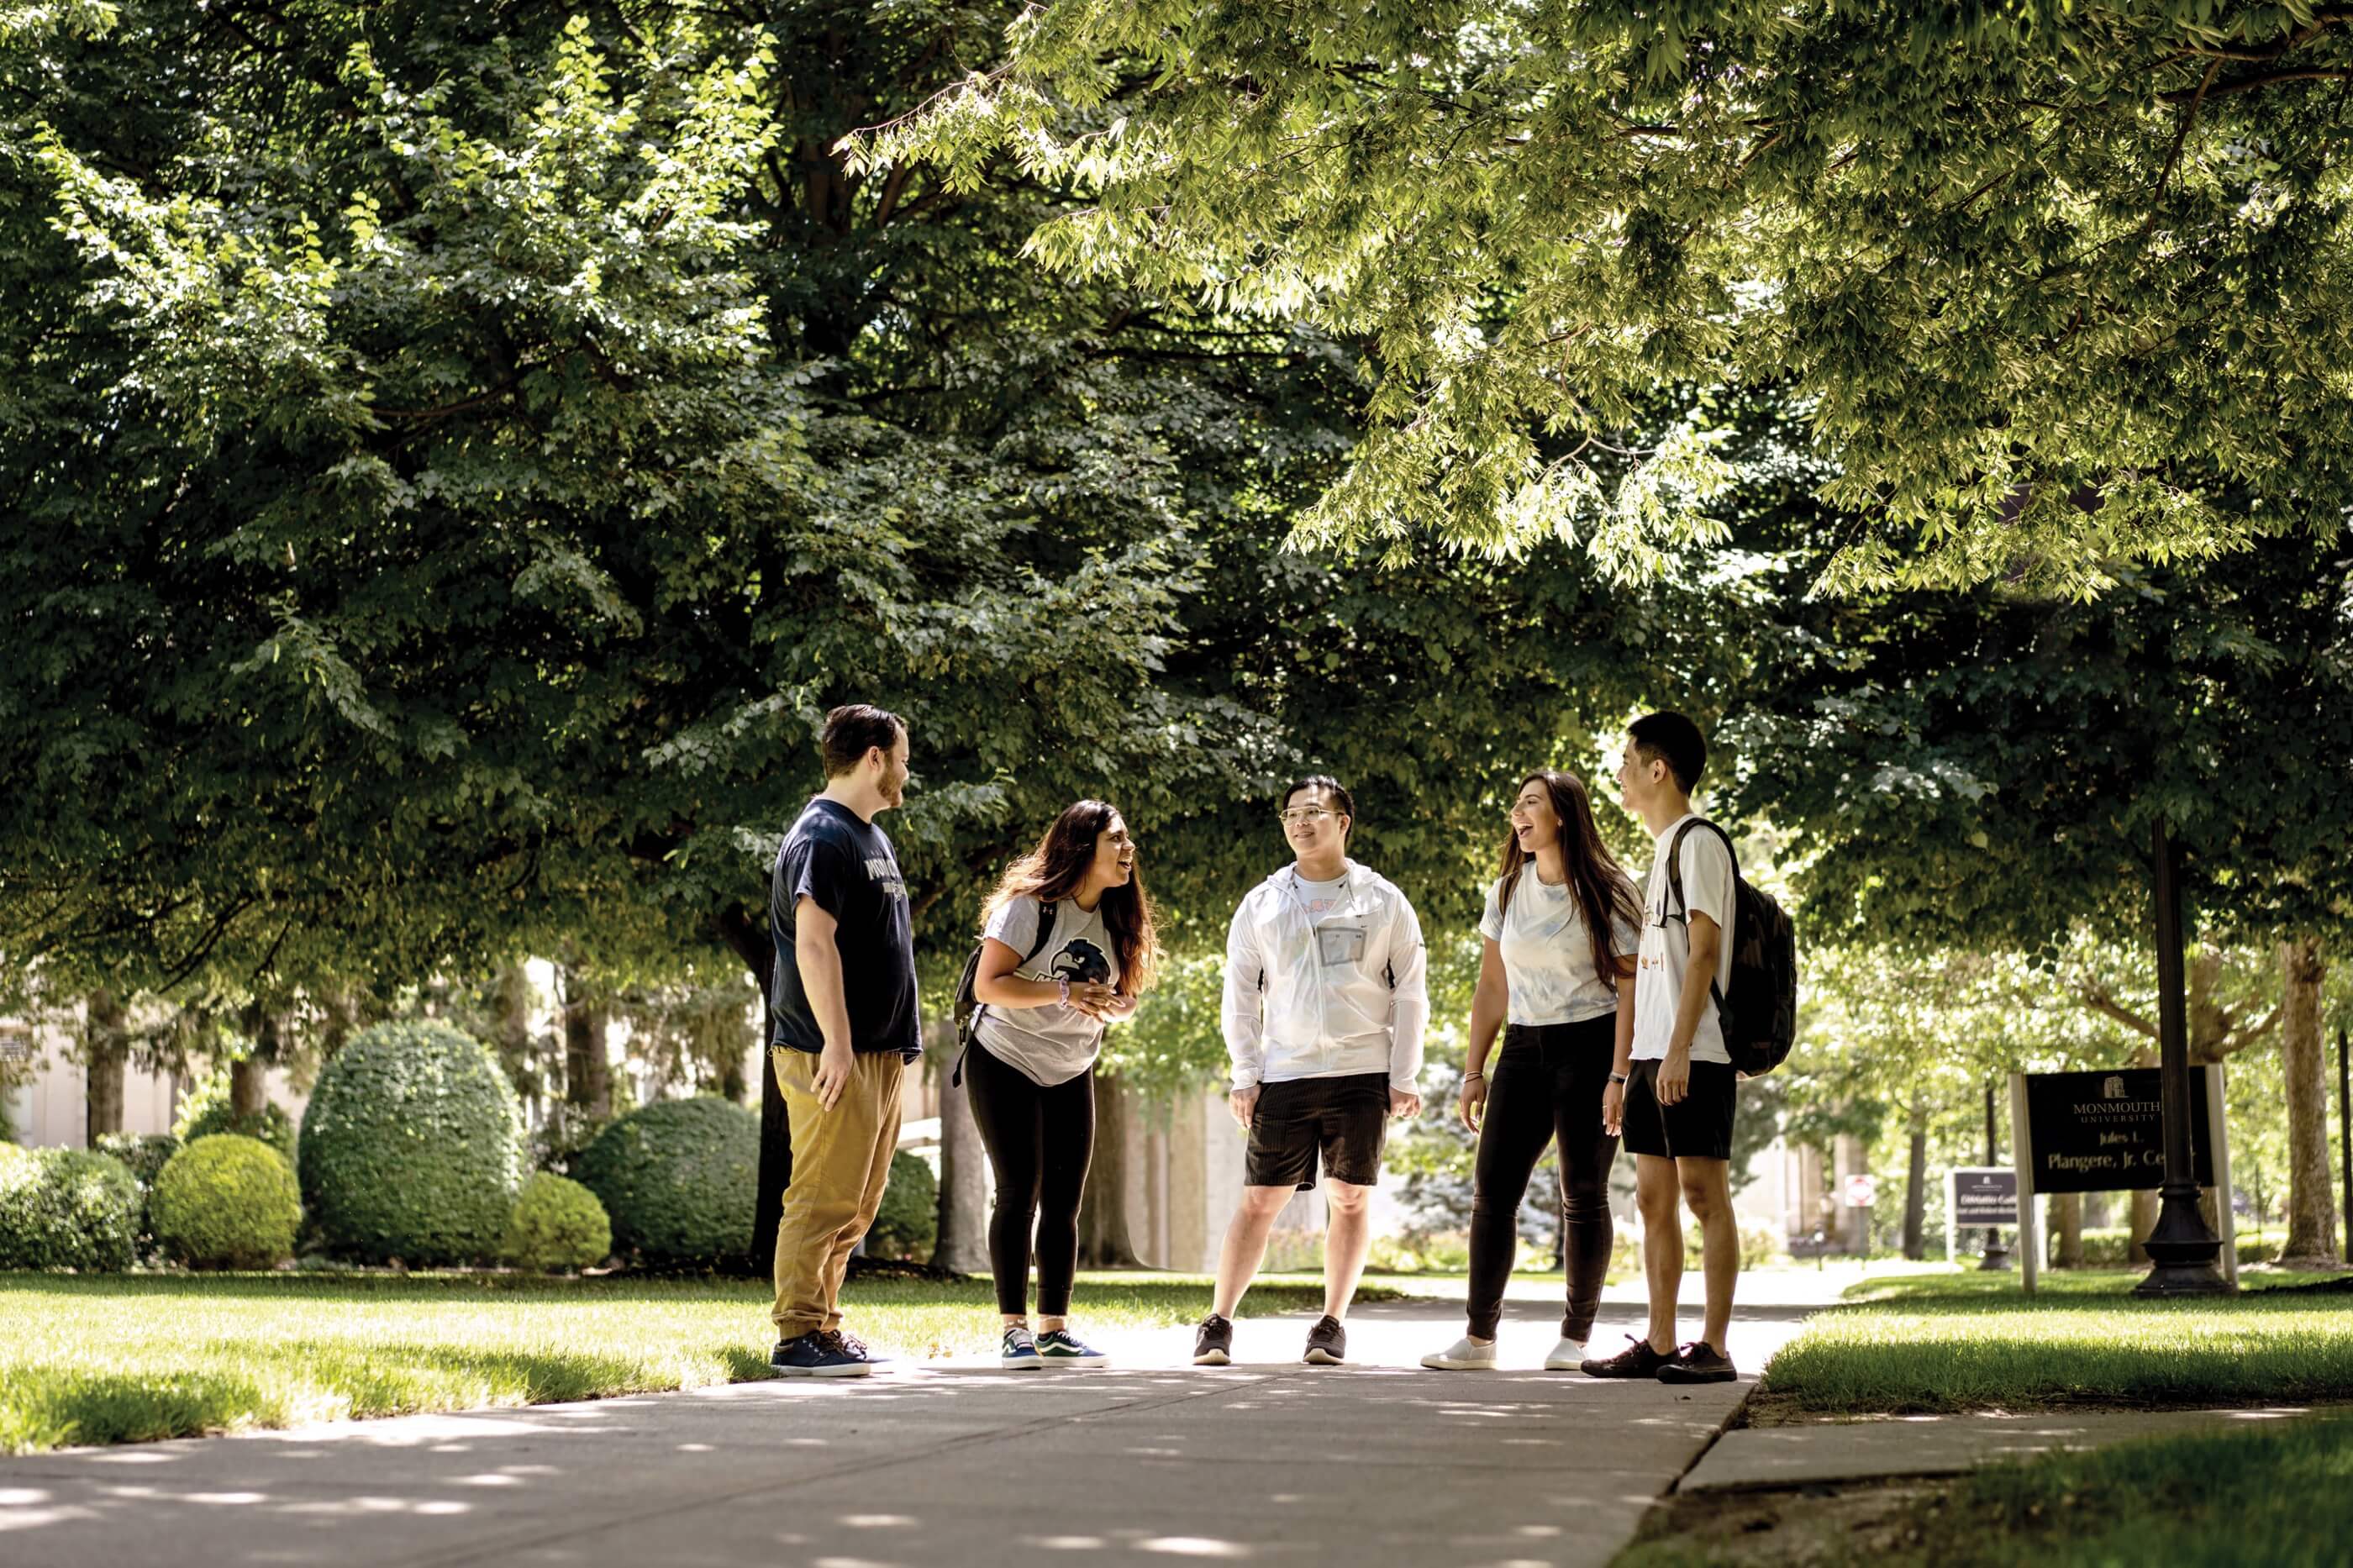 A group of five students talking while standing on a sunlit path under vibrant green trees